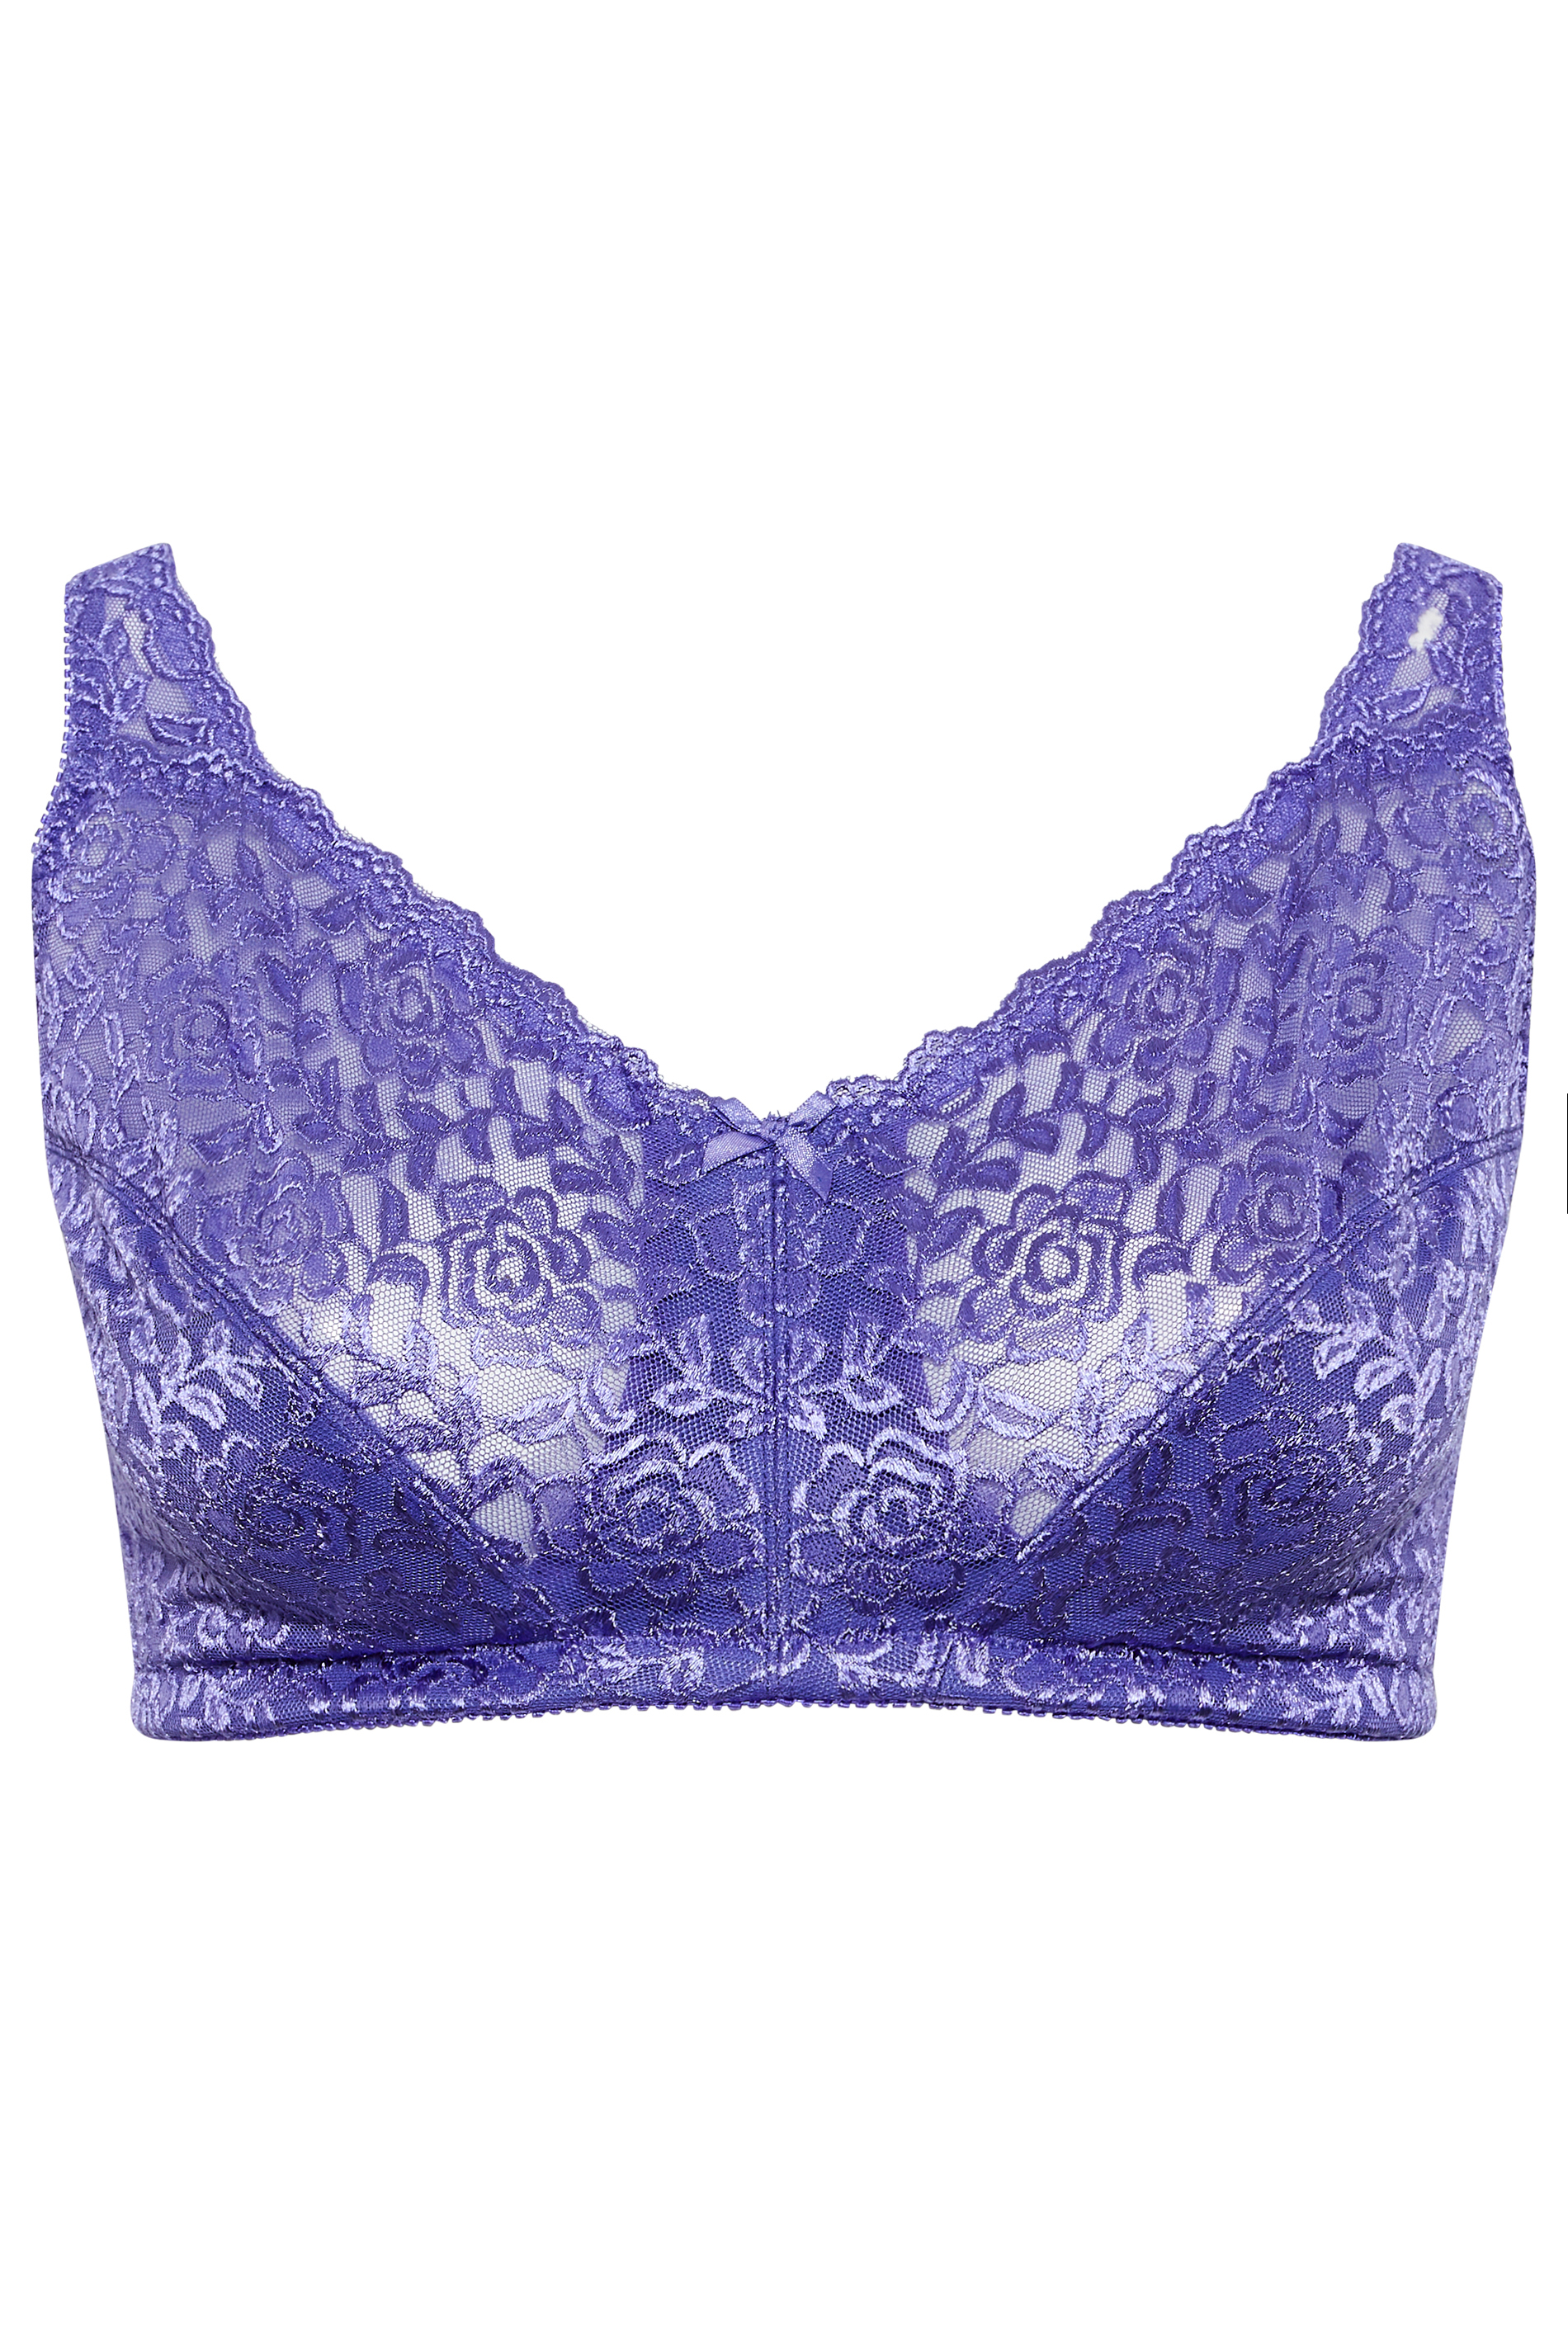 YOURS Plus Size Purple Hi Shine Lace Non-Padded Non-Wired Full Cup Bra 3